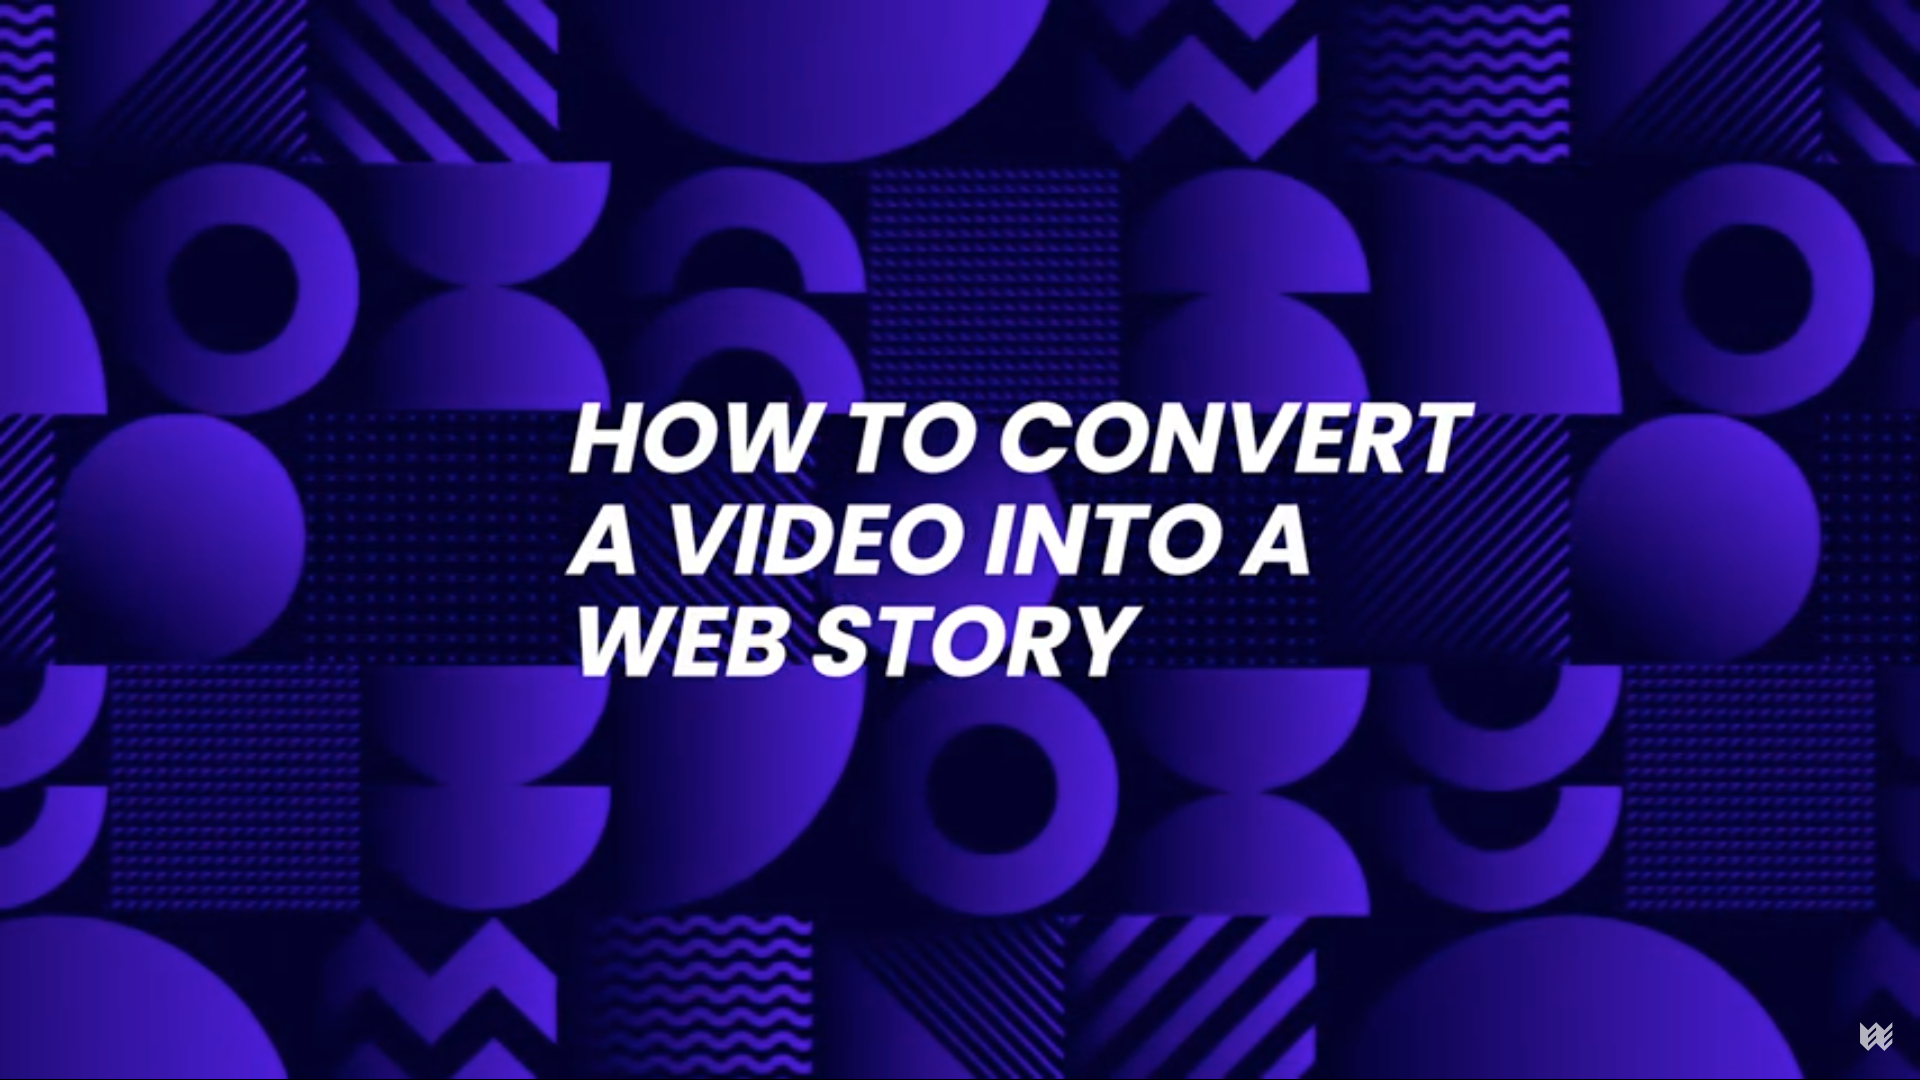 Three steps for turning a video into a Web Story